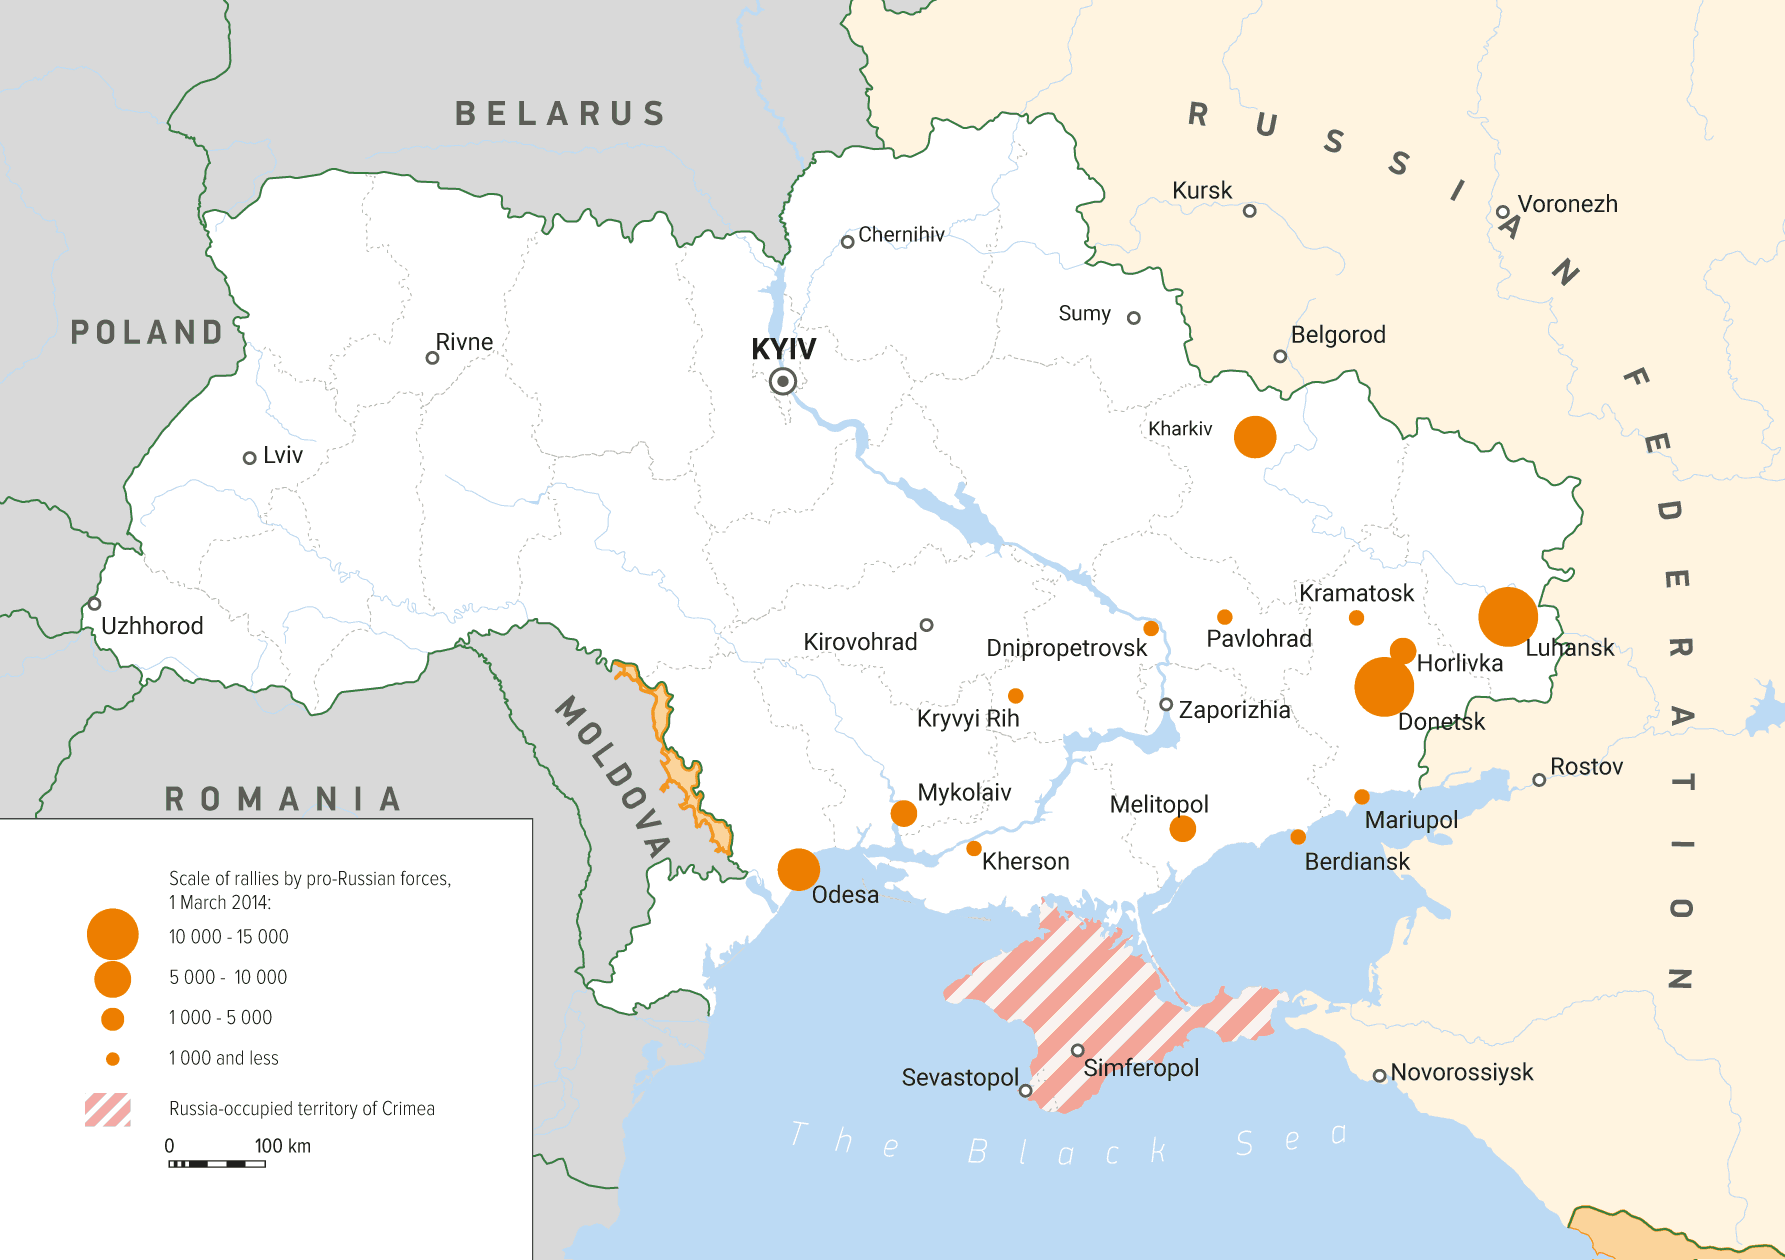 The geography and number of pro-Russian rallies in Ukraine on 1 March 2014